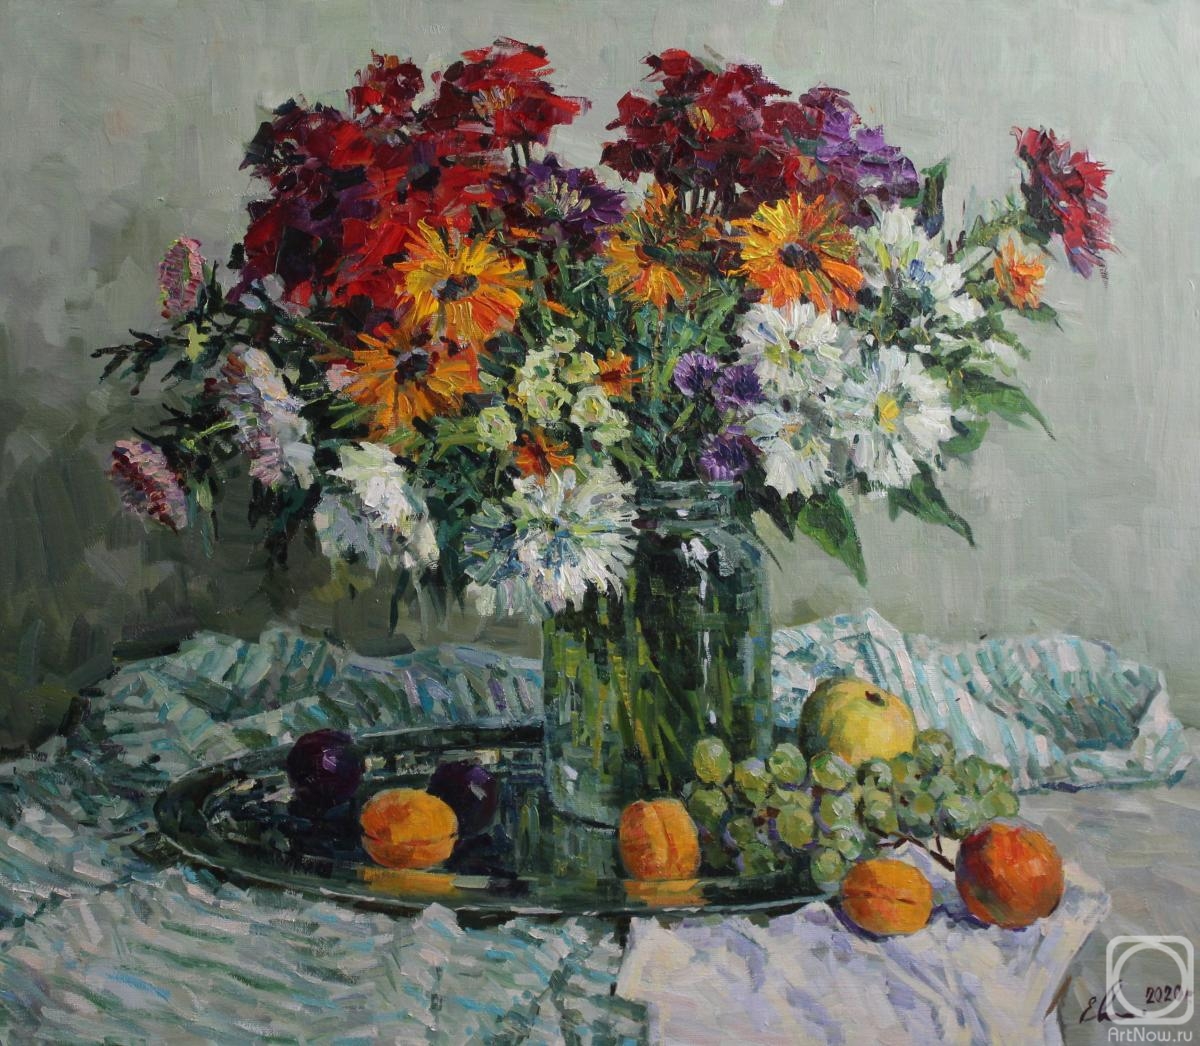 Malykh Evgeny. A summer bouquet